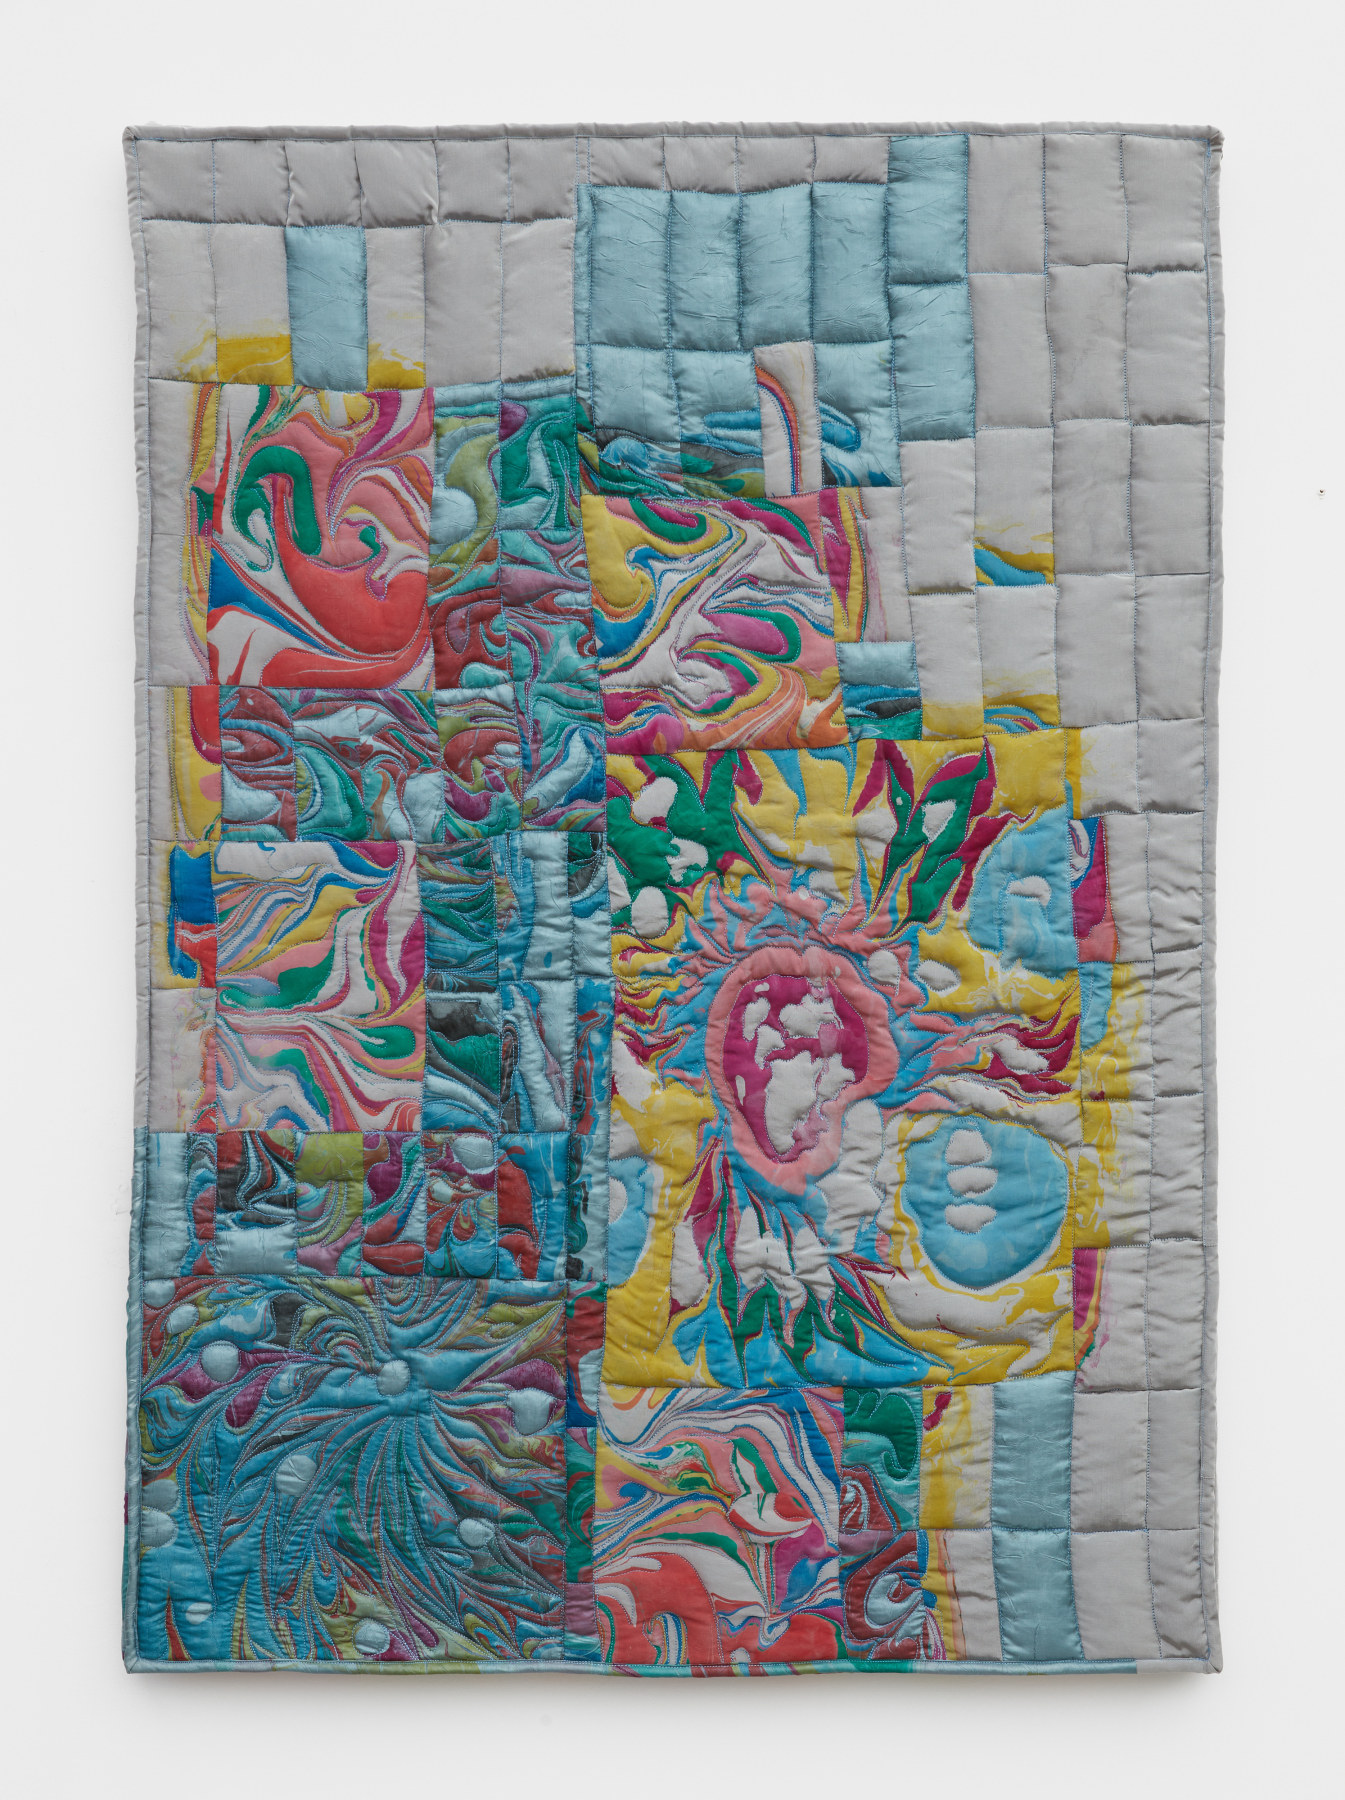 Libby Rosen's artwork "Oceania". Light greys, pinks and blues swirl in abstract shapes in a sewn textile grid. 41 x 30 in (104.1 x 76.2 cm), acrylic, satin, and batting, 2022.